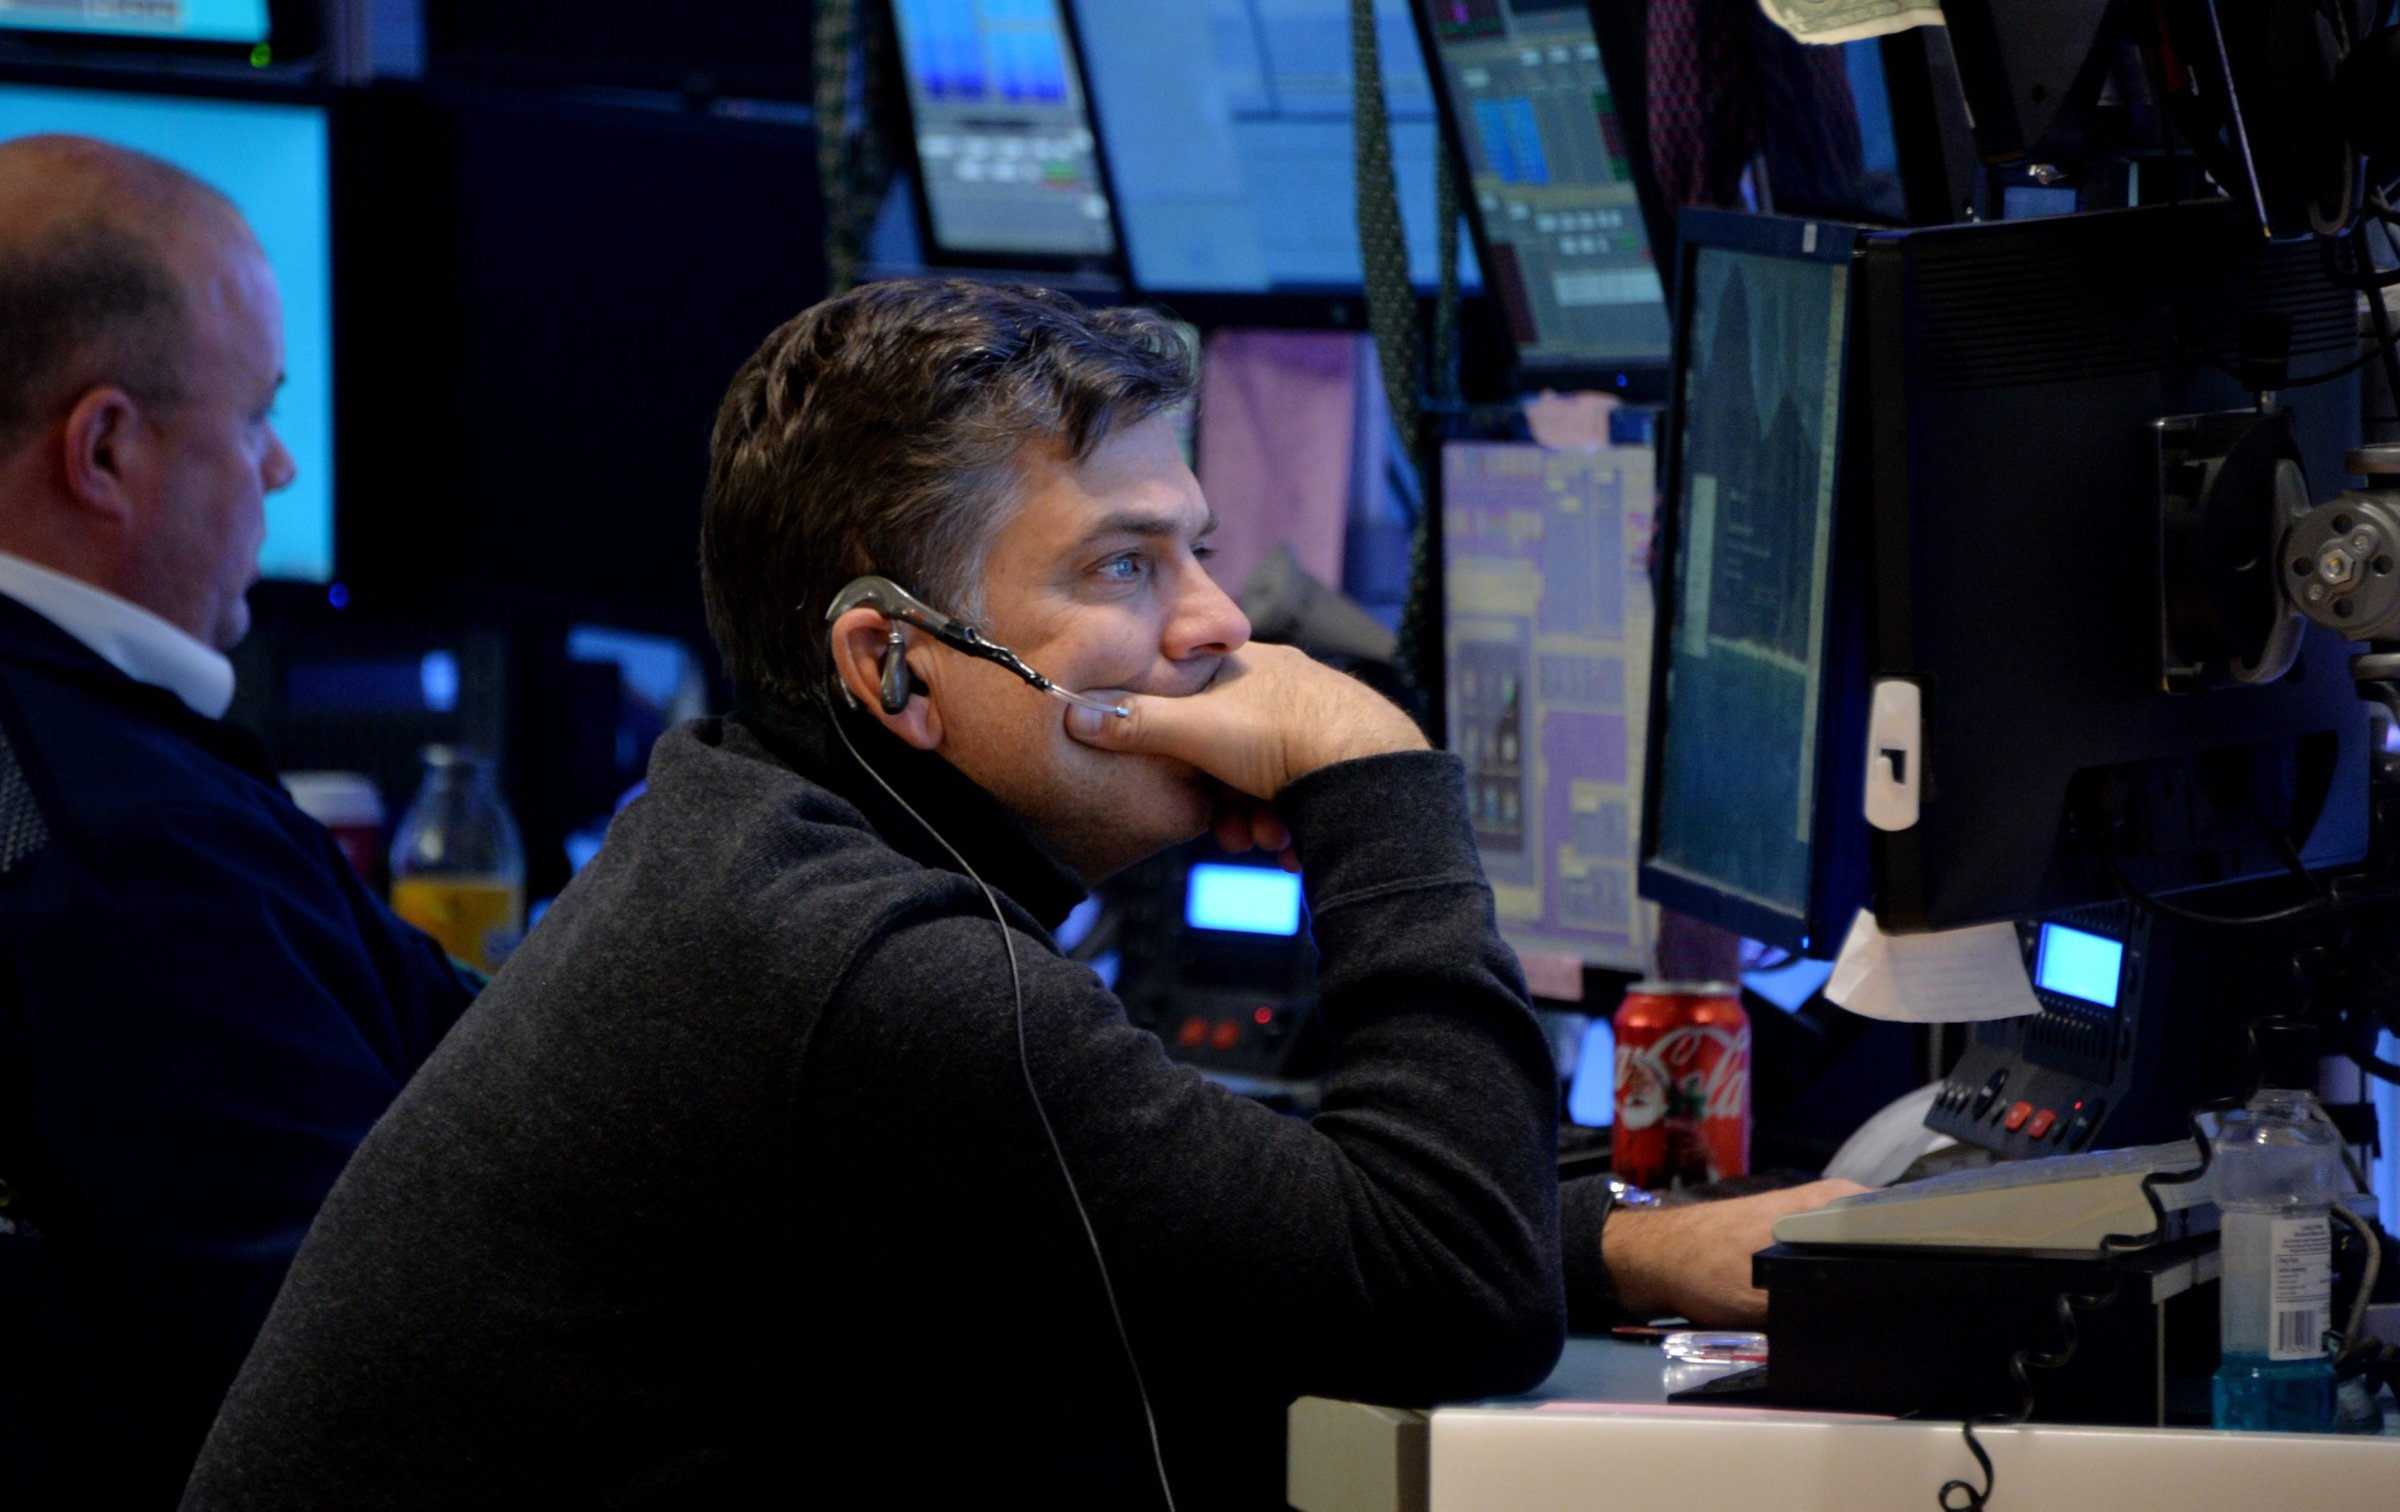 A trader works on the floor of the New York Stock Exchange at the end of the trading day in New York on Dec. 12, 2014.